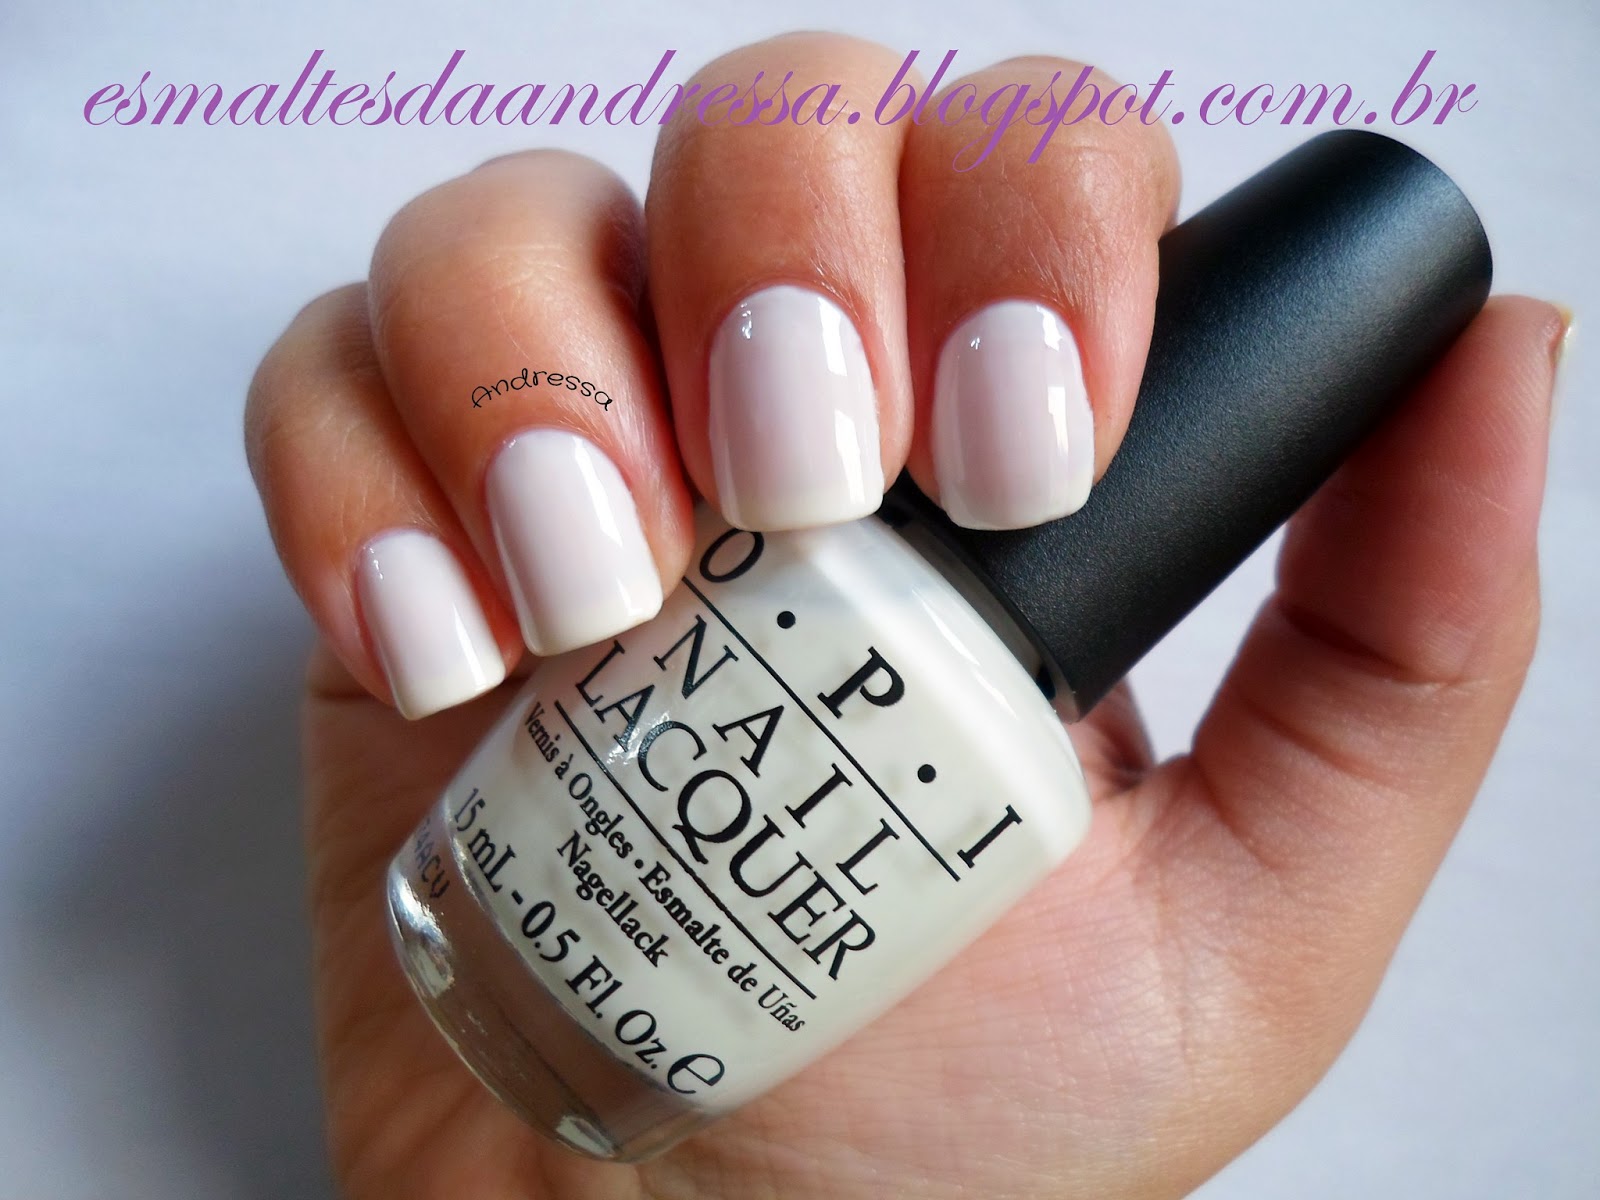 10. OPI GelColor Nail Polish - Funny Bunny - wide 2